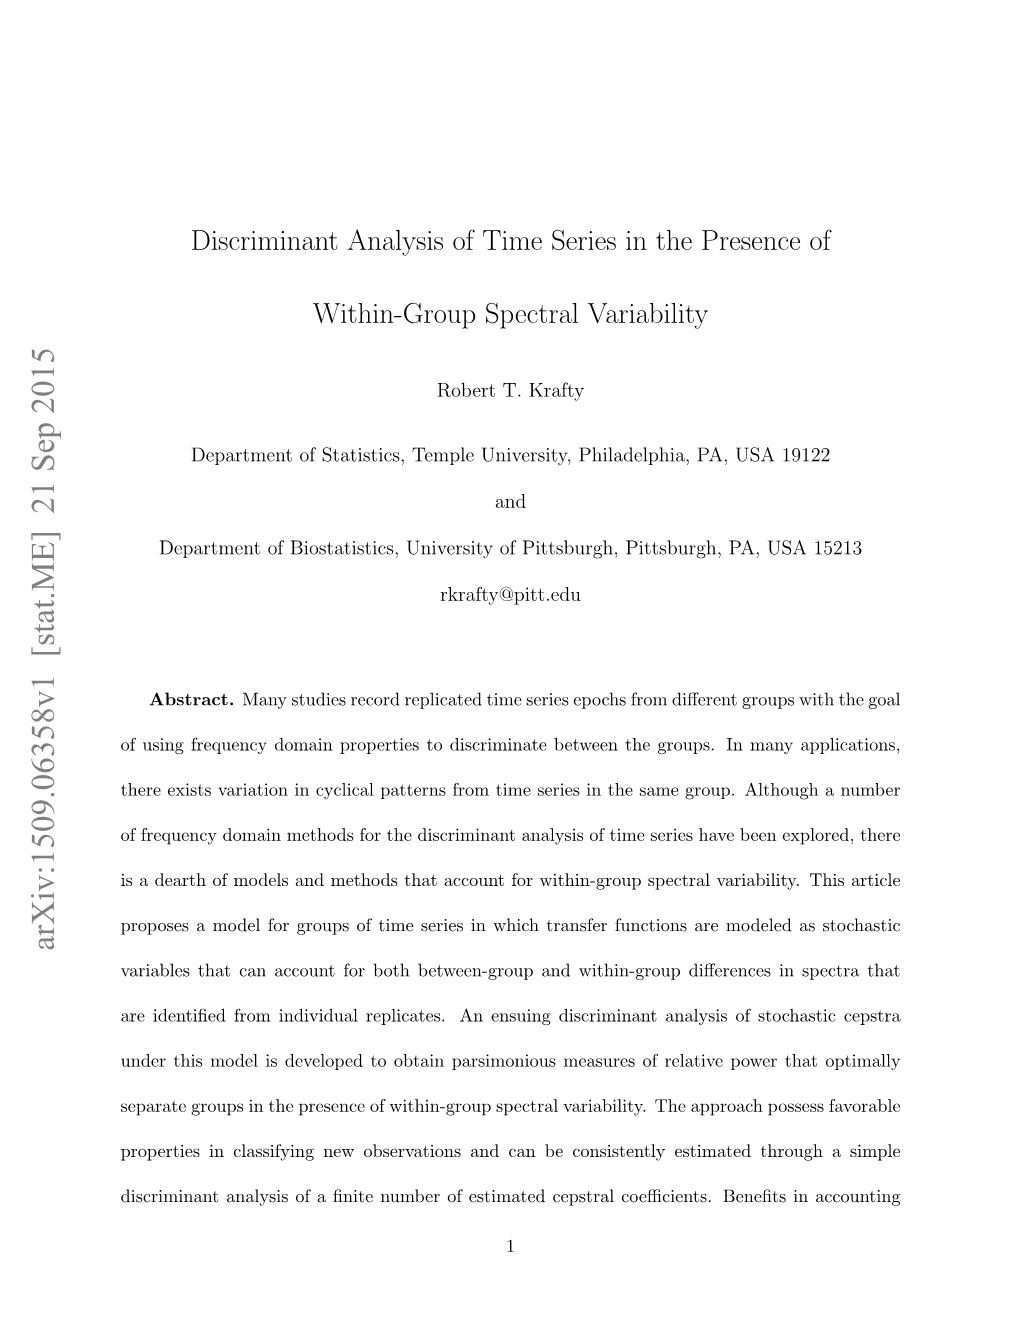 Discriminant Analysis of Time Series in the Presence of Within-Group